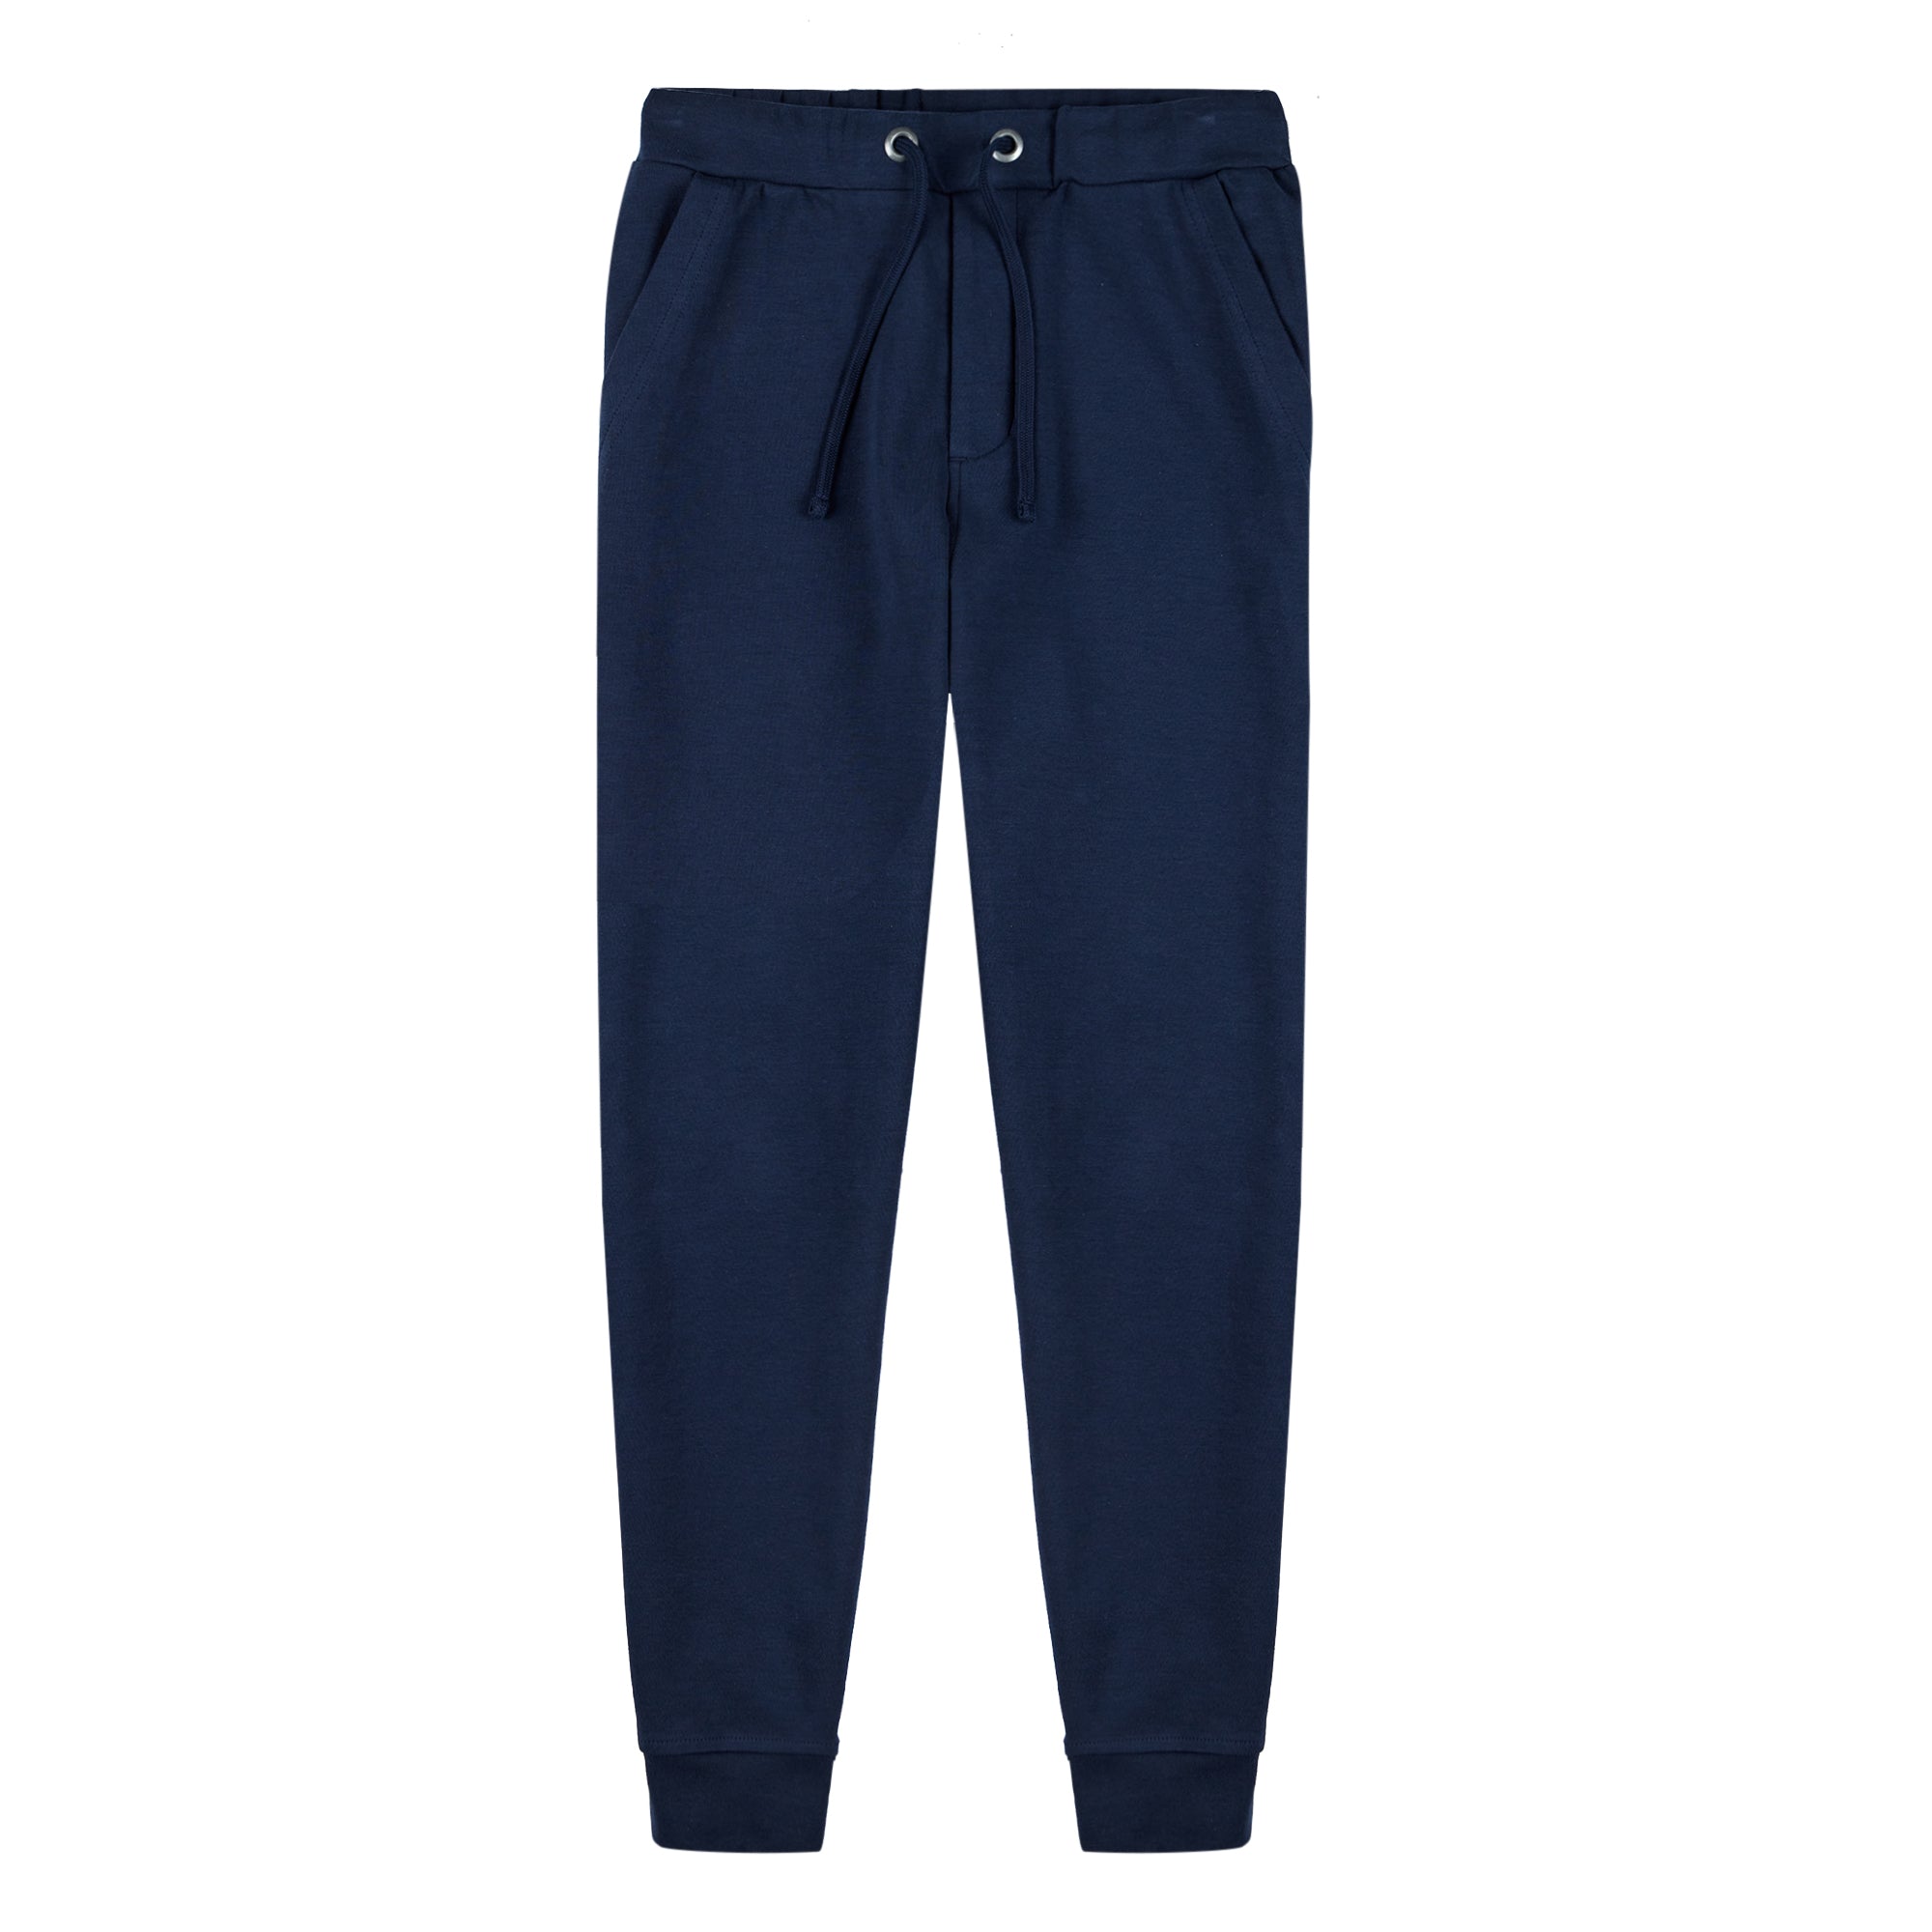 All Day Sweatpants - Navy